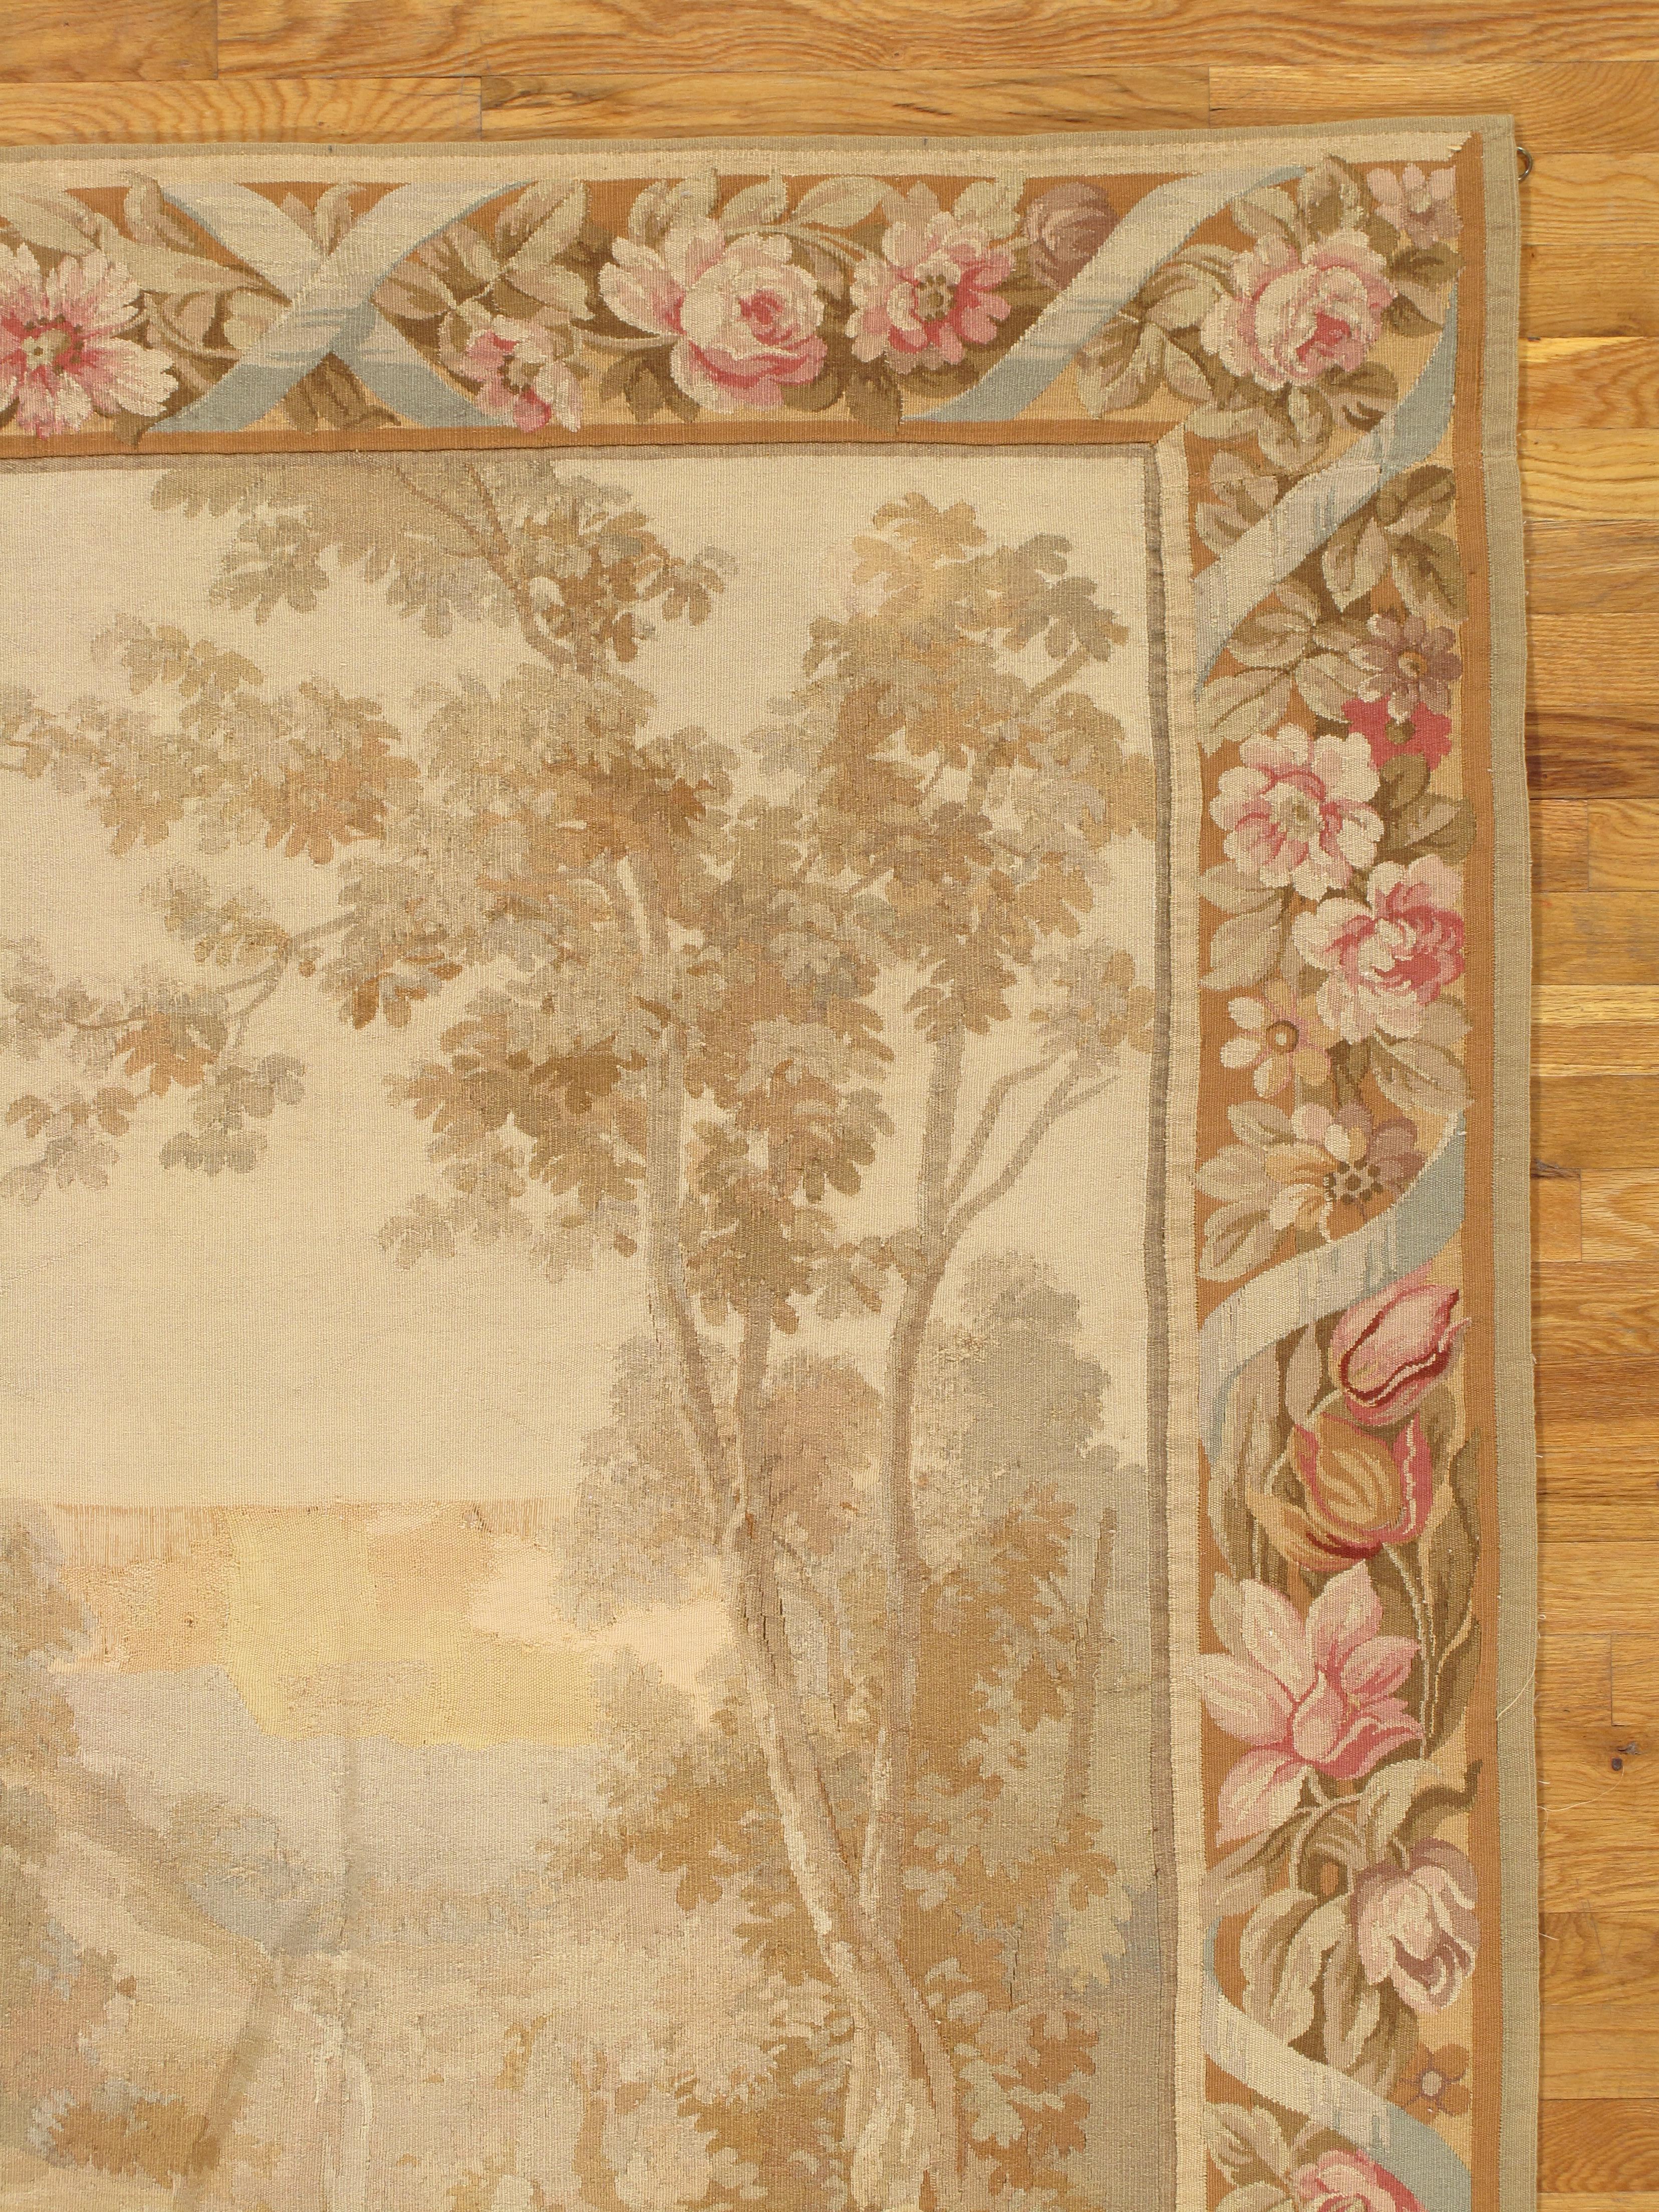 19th Century Aubusson Tapestry, Handmade, Ivory, Taupe, Cream For Sale 3